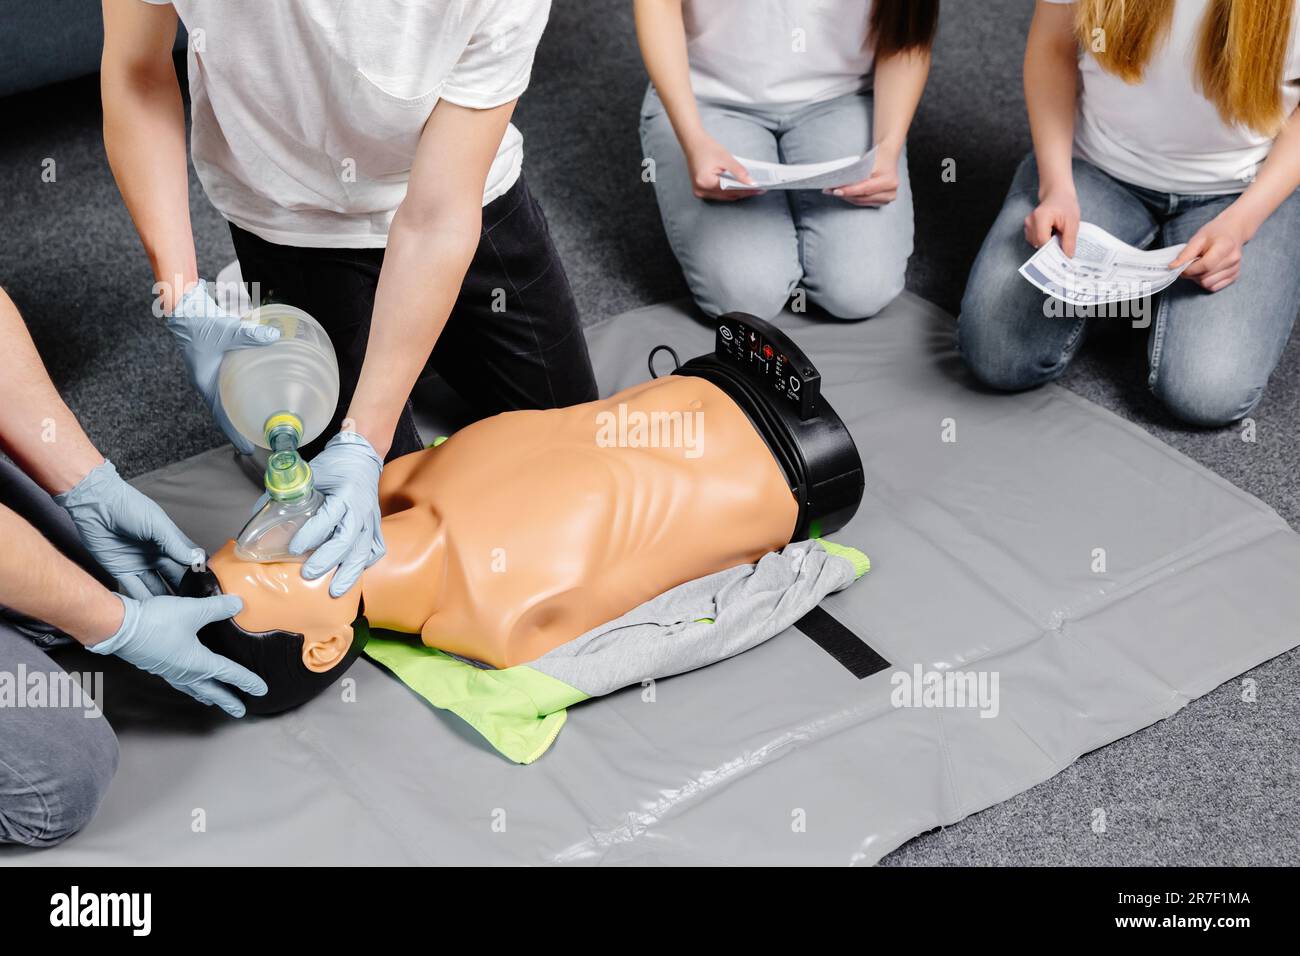 First Aid Training - Cardiopulmonary resuscitation. First aid course on cpr dummy Stock Photo